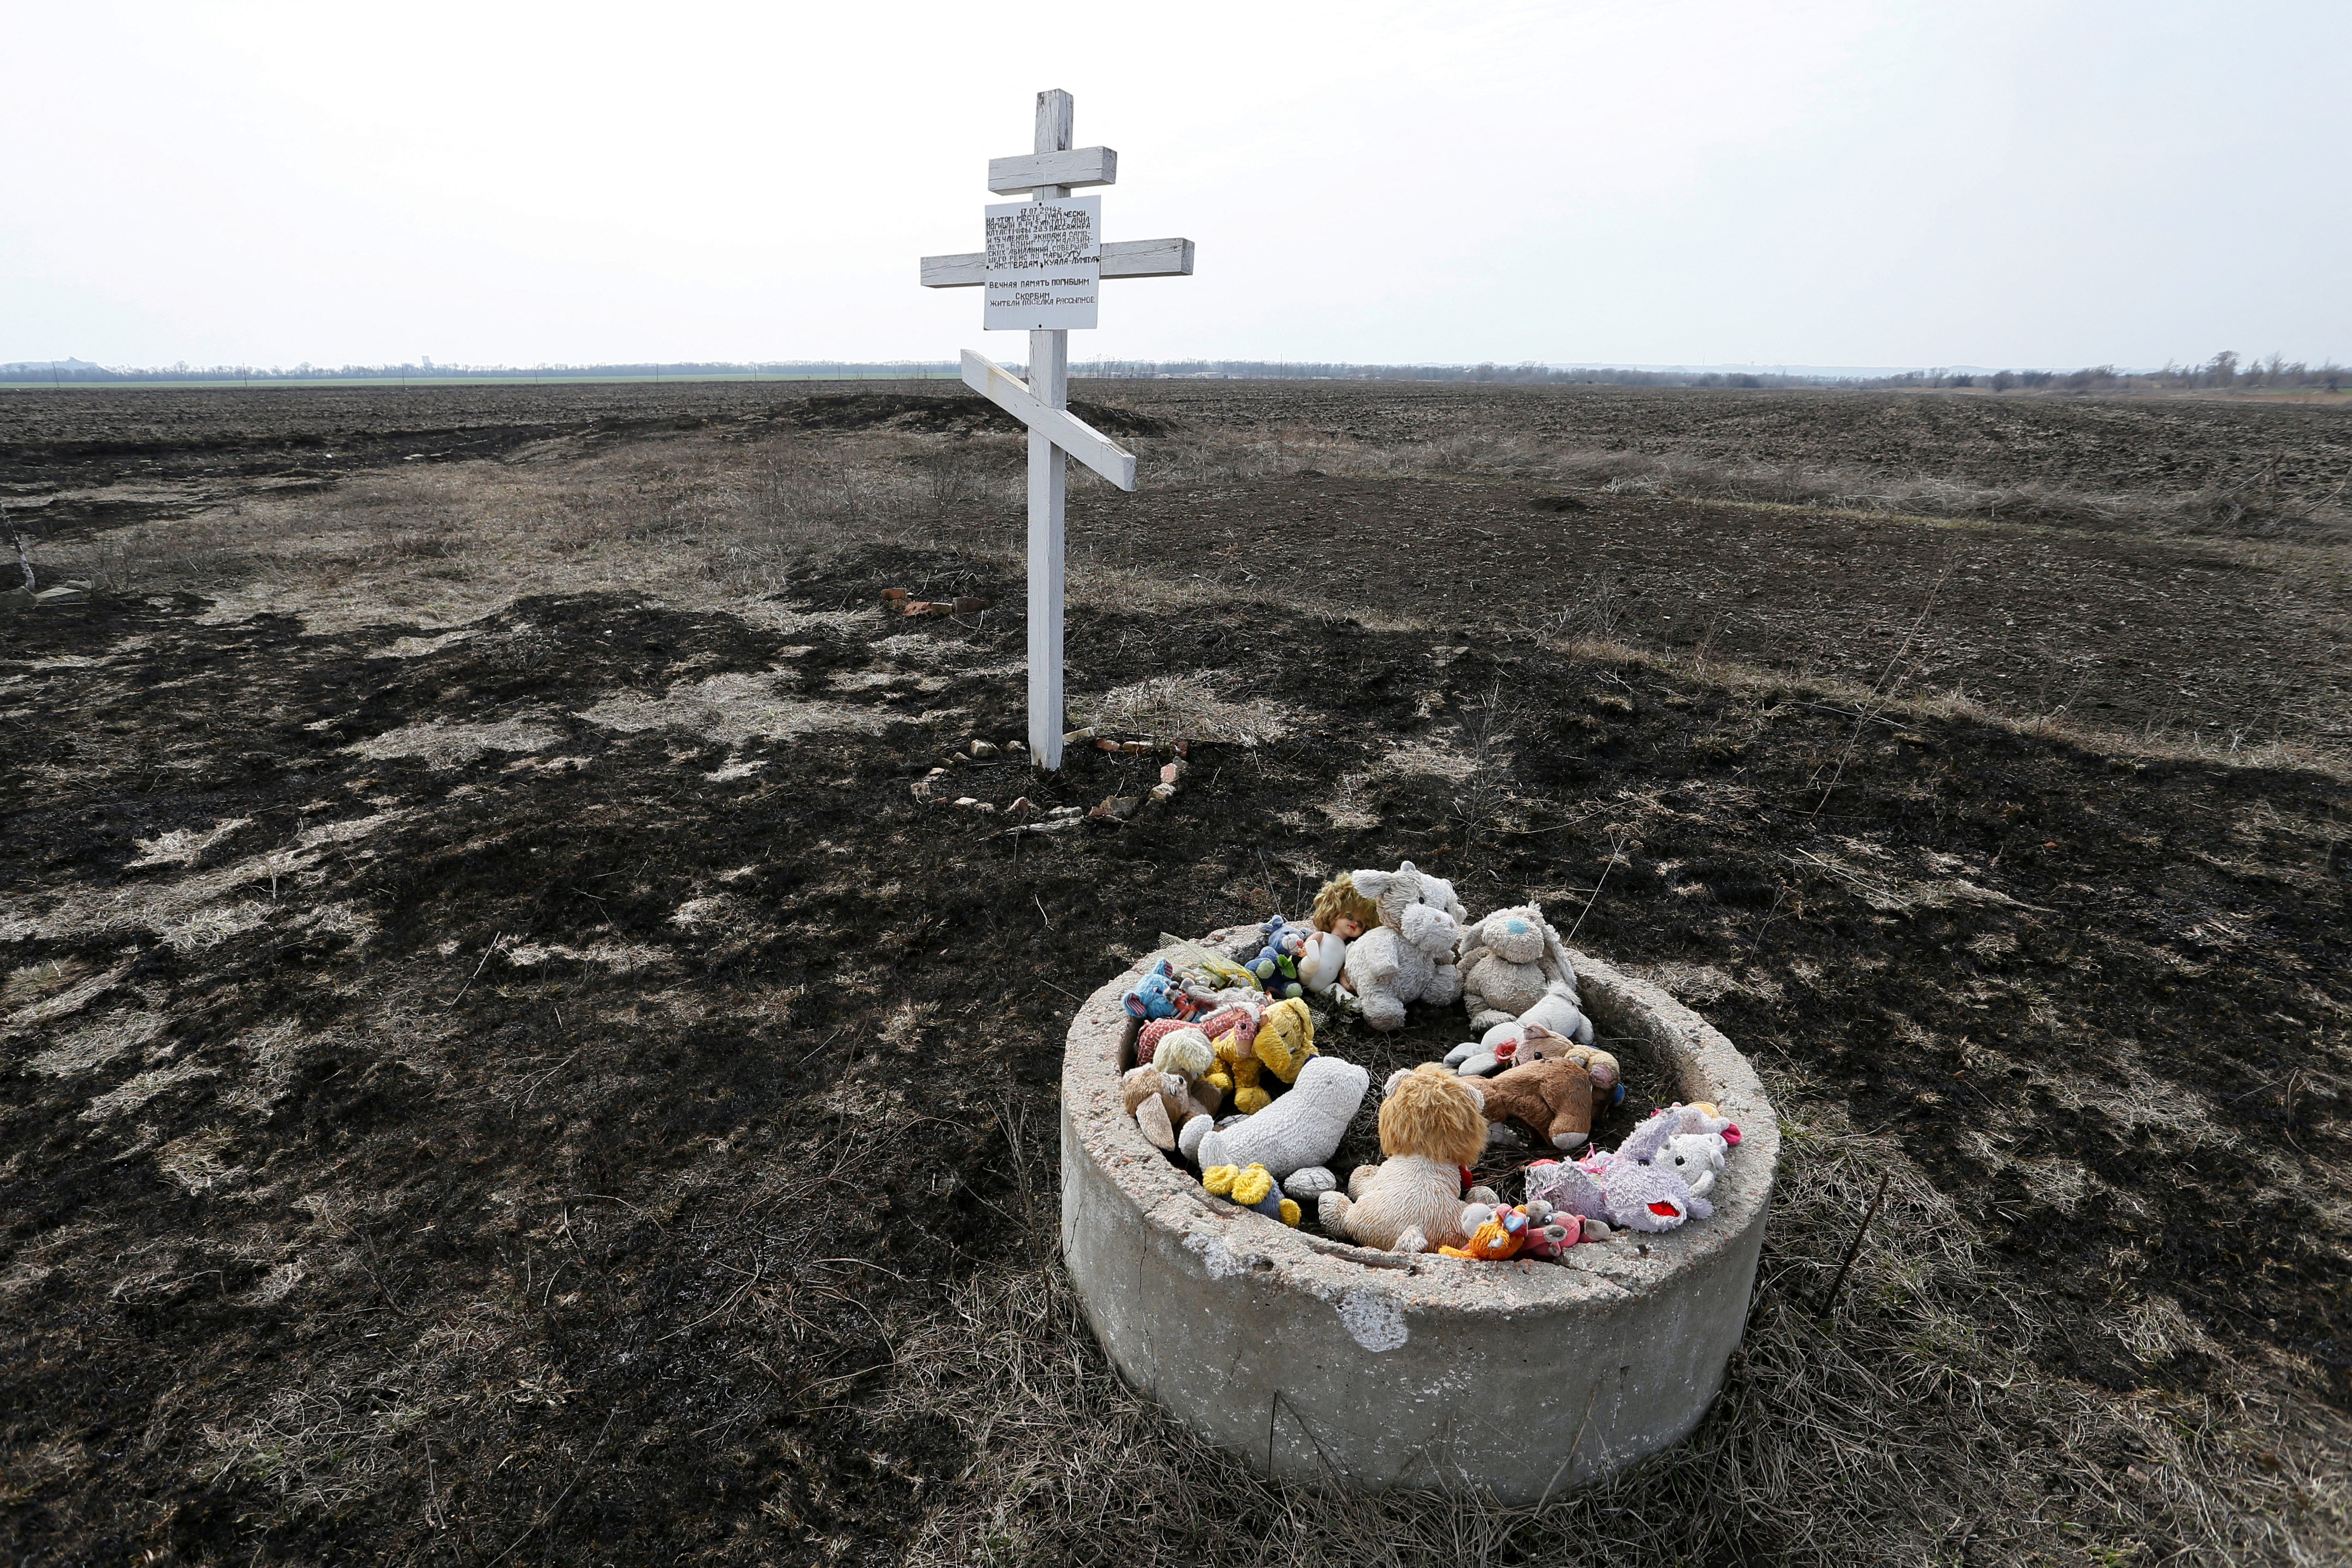 Toys are placed near the cross in memory of victims of Malaysia Airlines Flight MH17 plane crash in Rozsypne